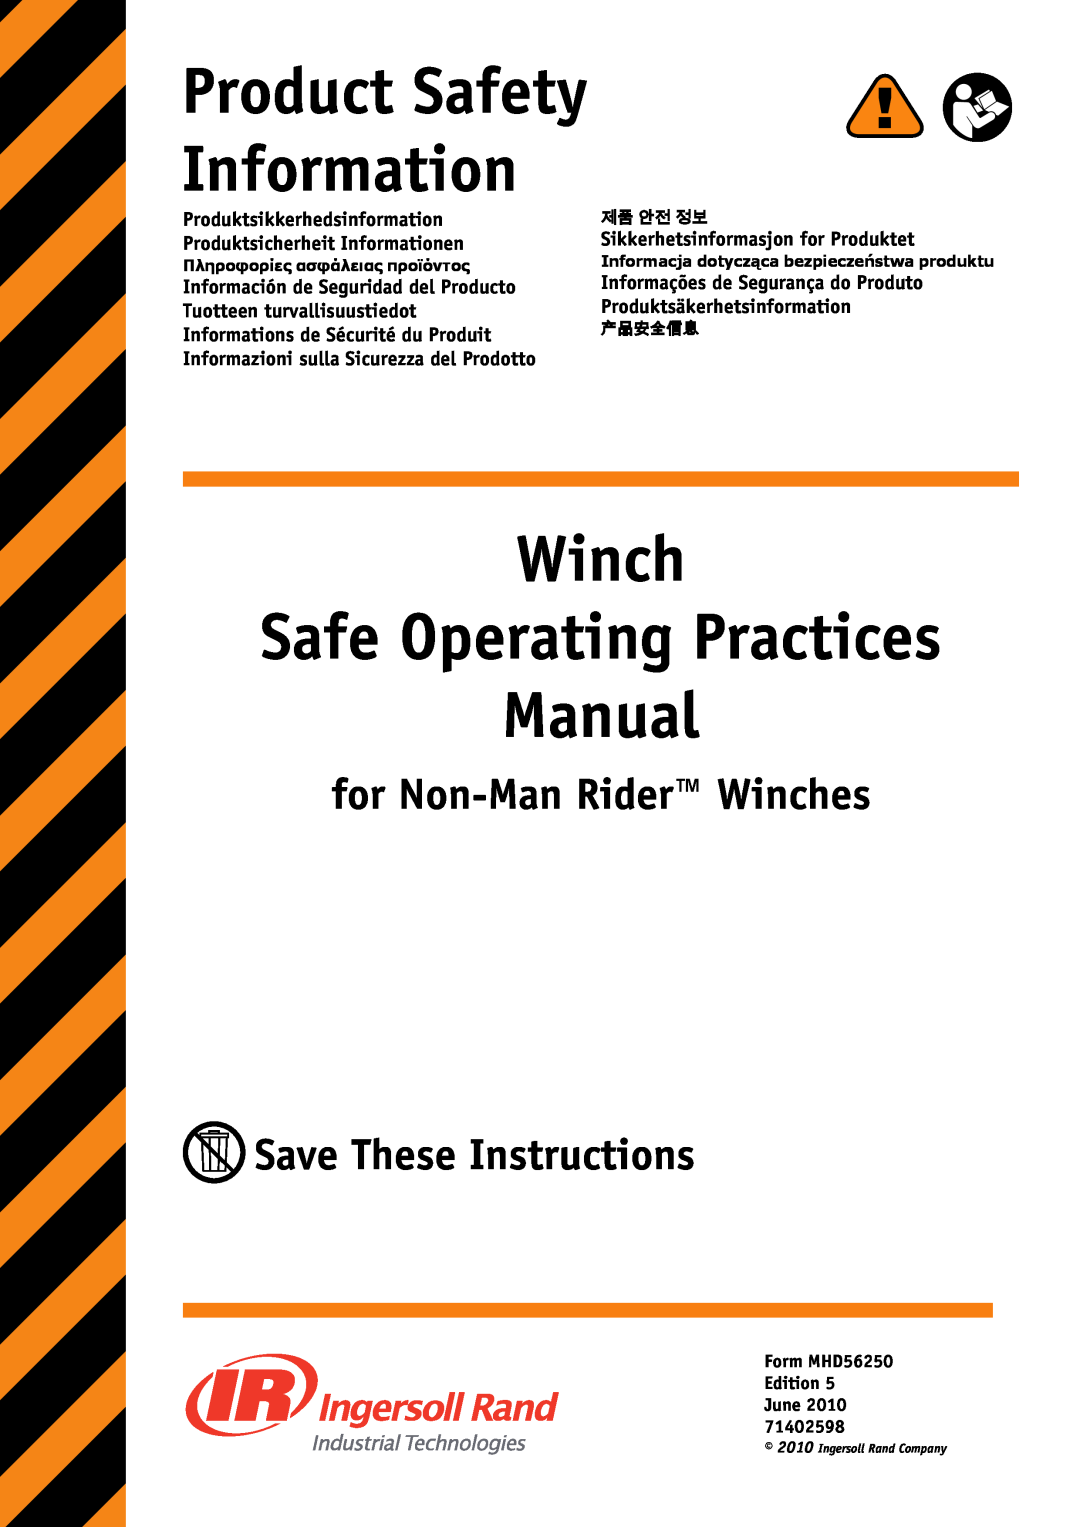 Ingersoll-Rand MHD56250 manual Winch Safe Operating Practices Manual, Product Safety Information 